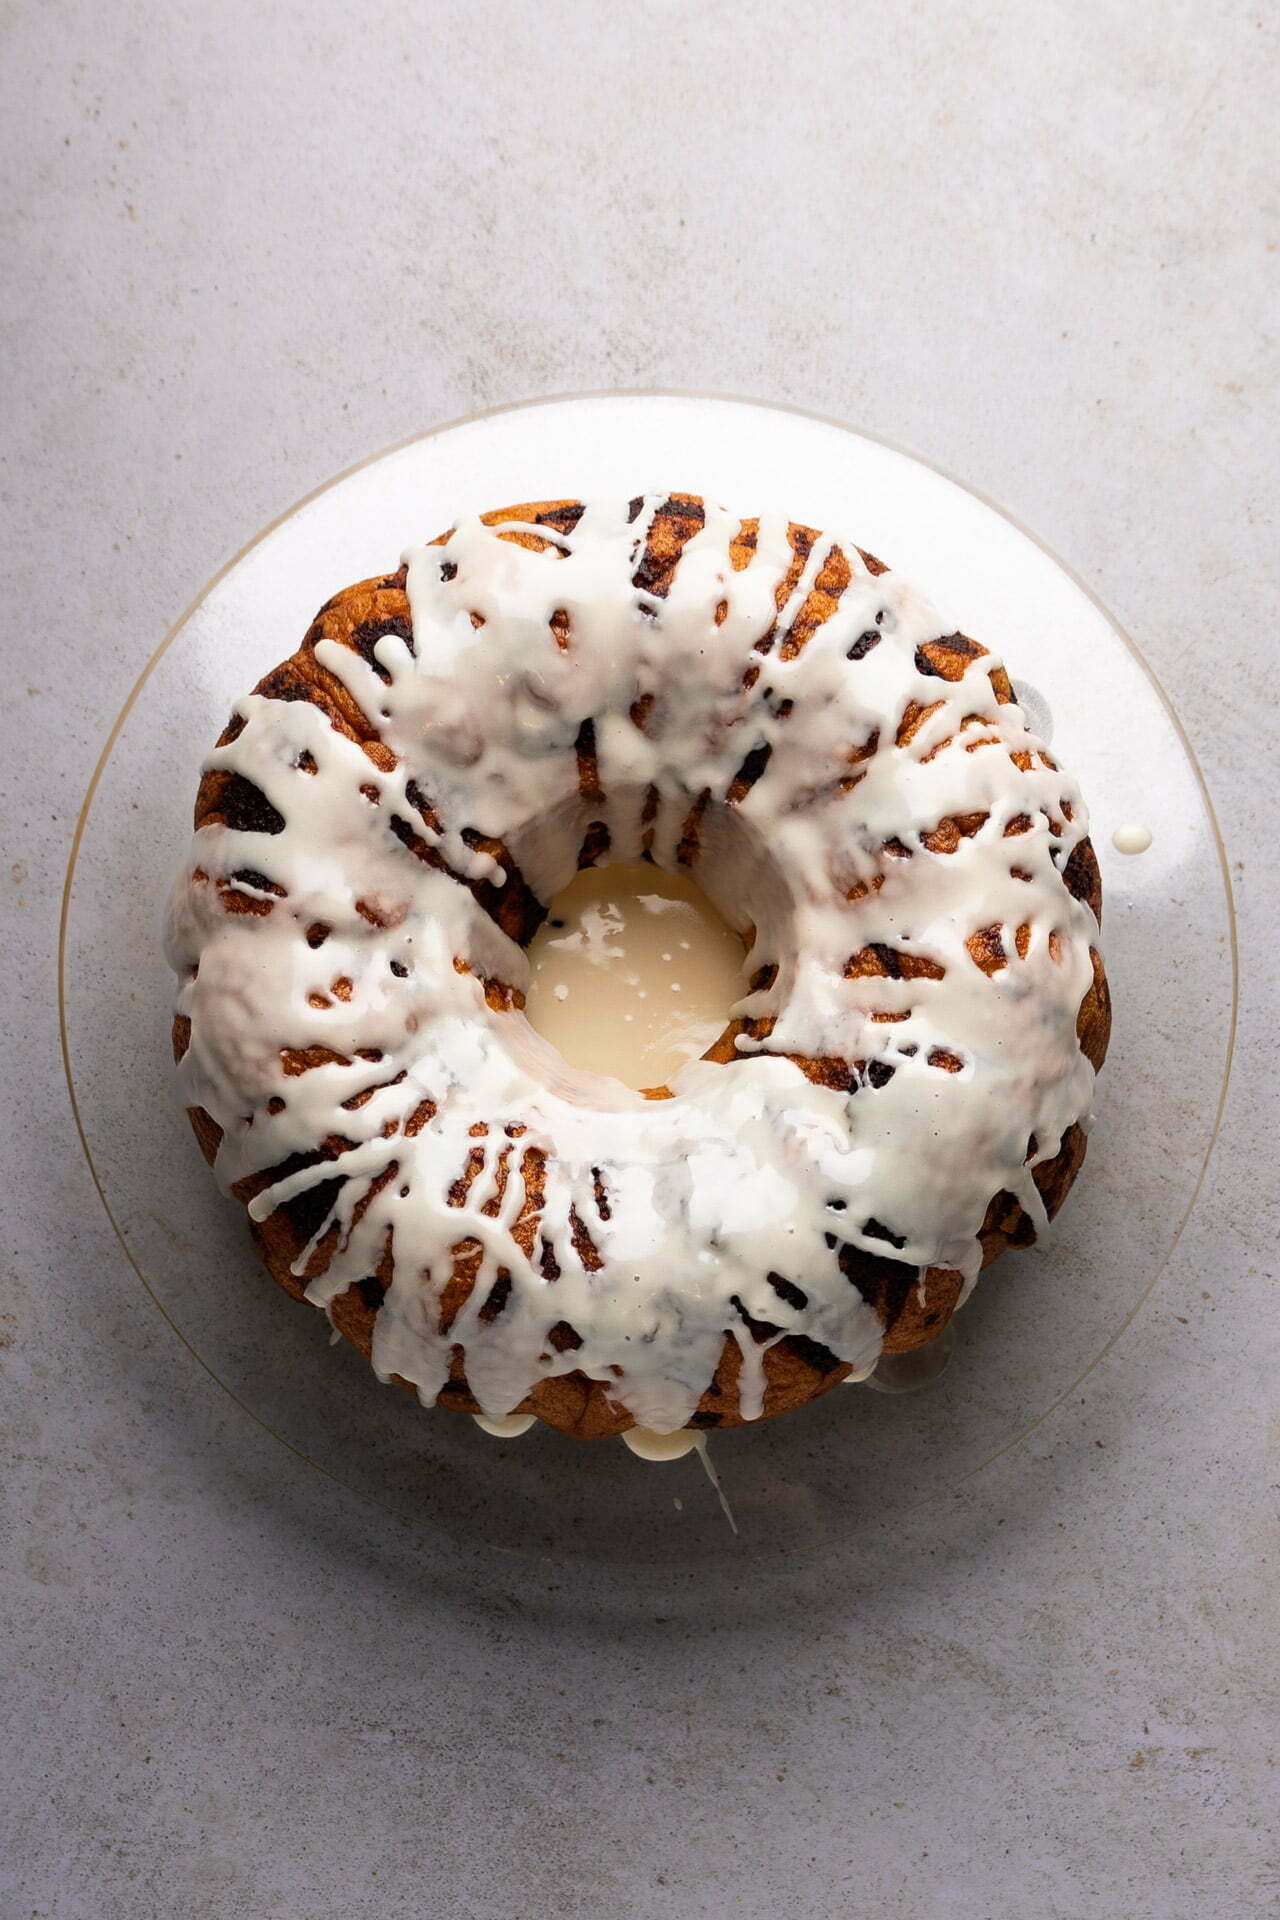 A vegan bundt cake with icing on a plate.